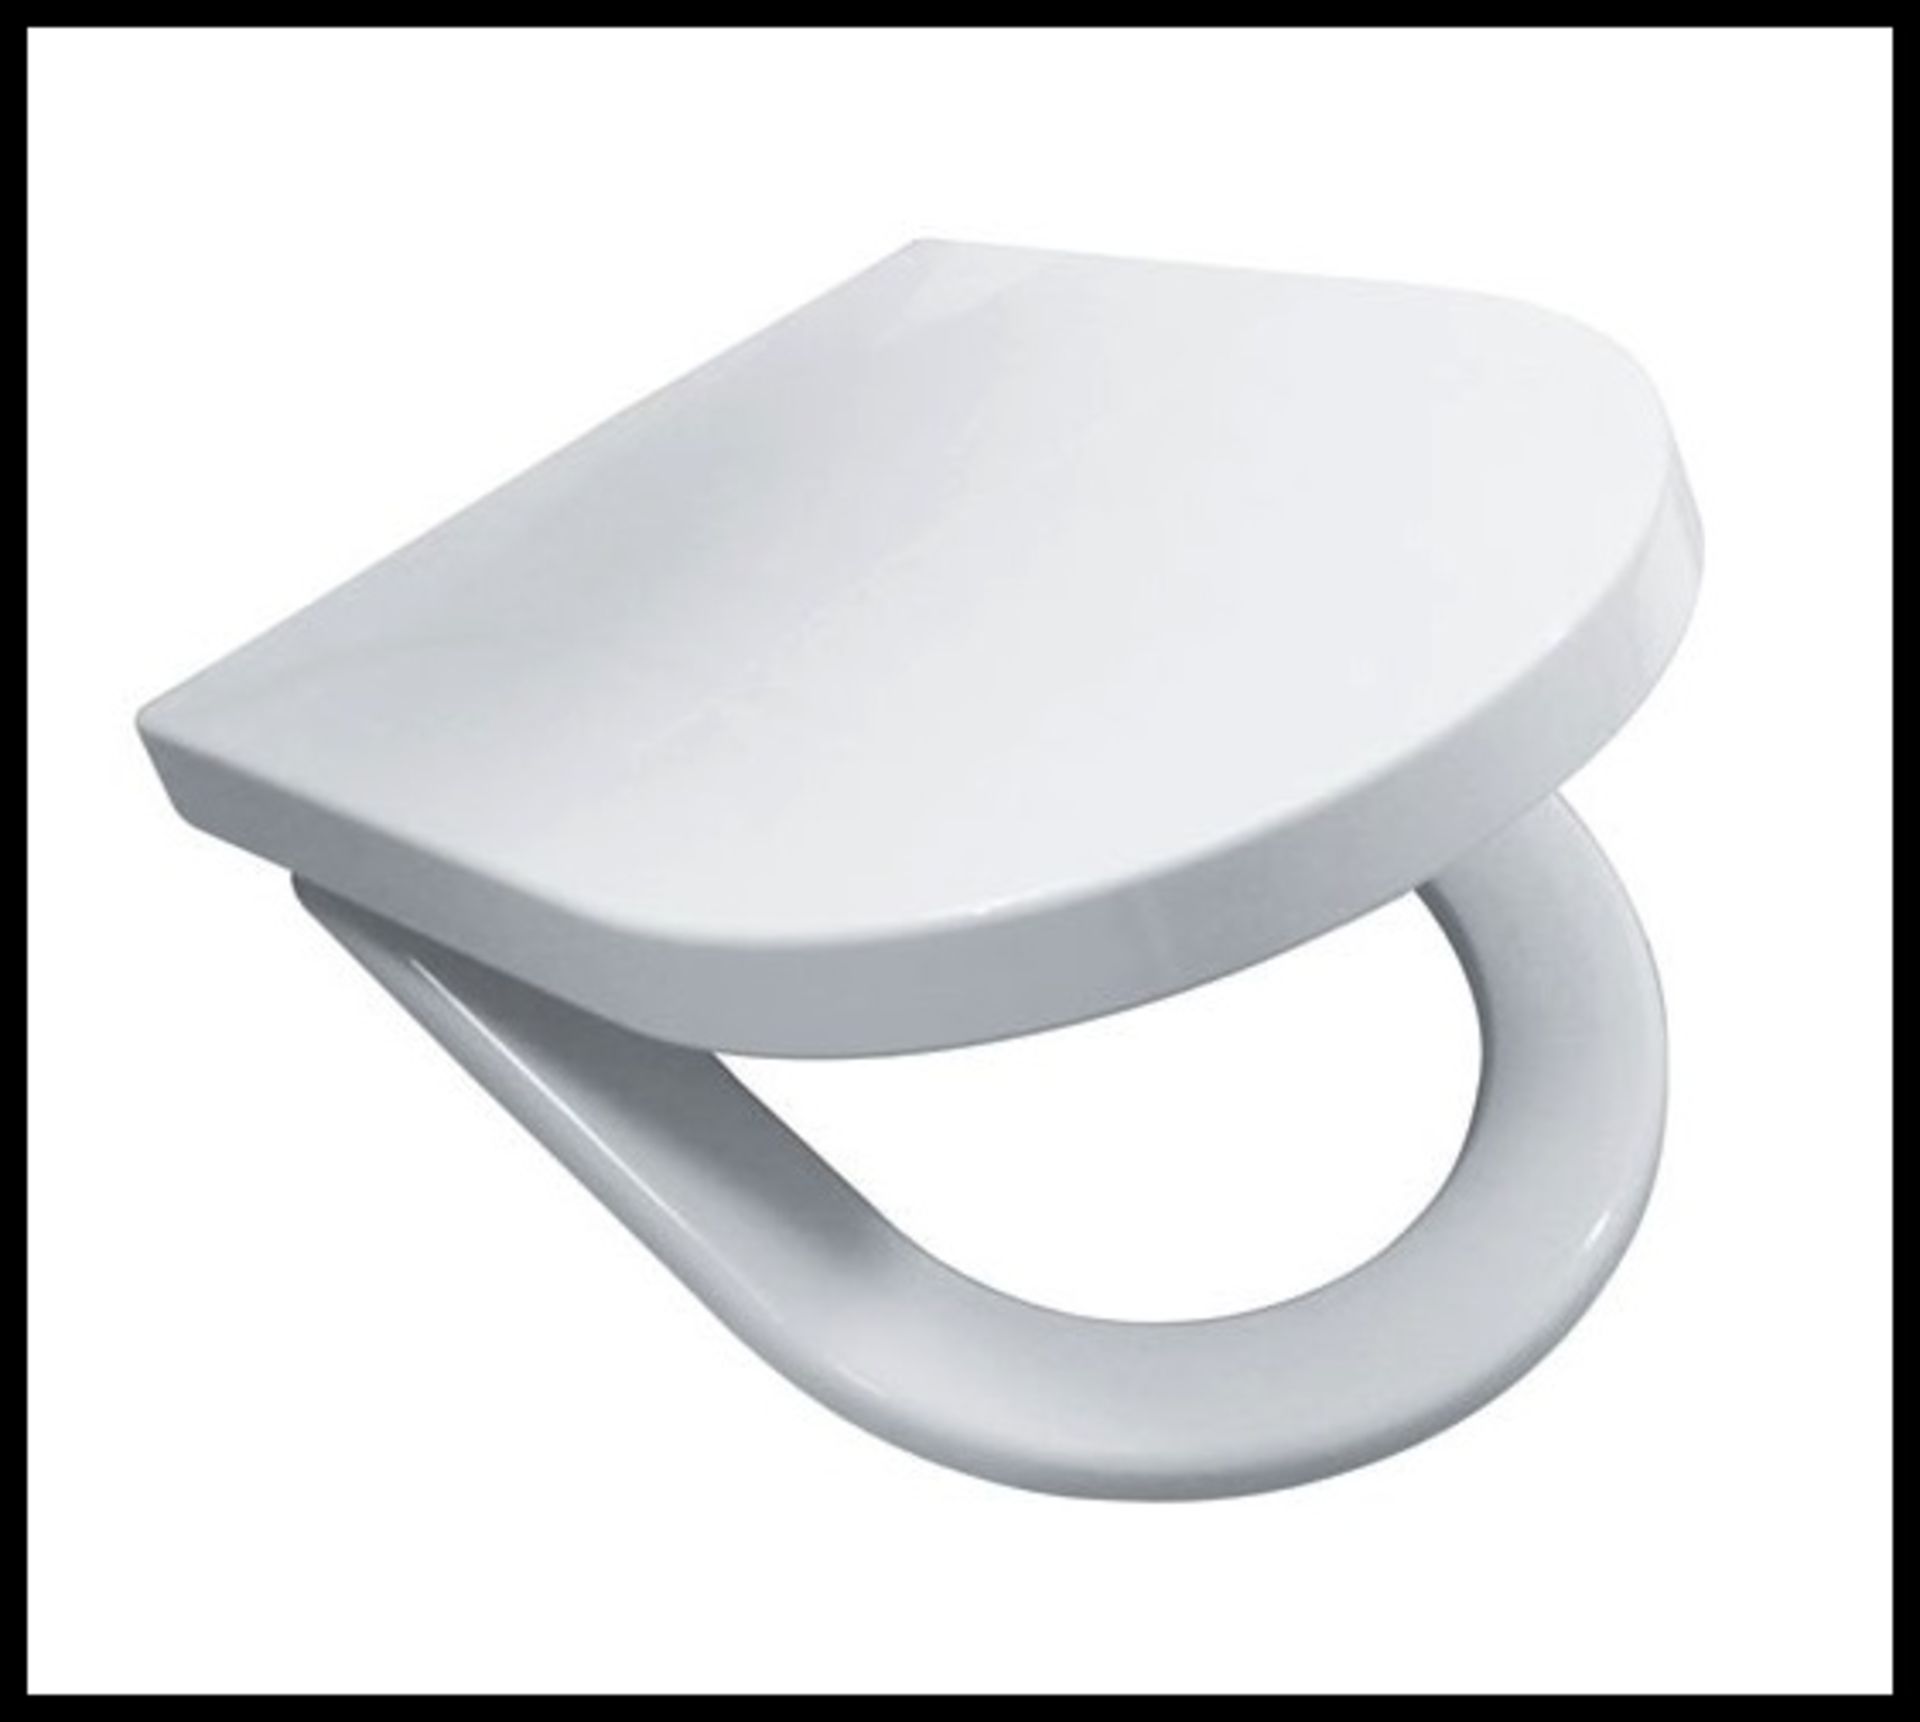 1 x Vogue Cosmos Modern White Soft Close Toilet Seat and Cover Top Fixing - Brand New Boxed